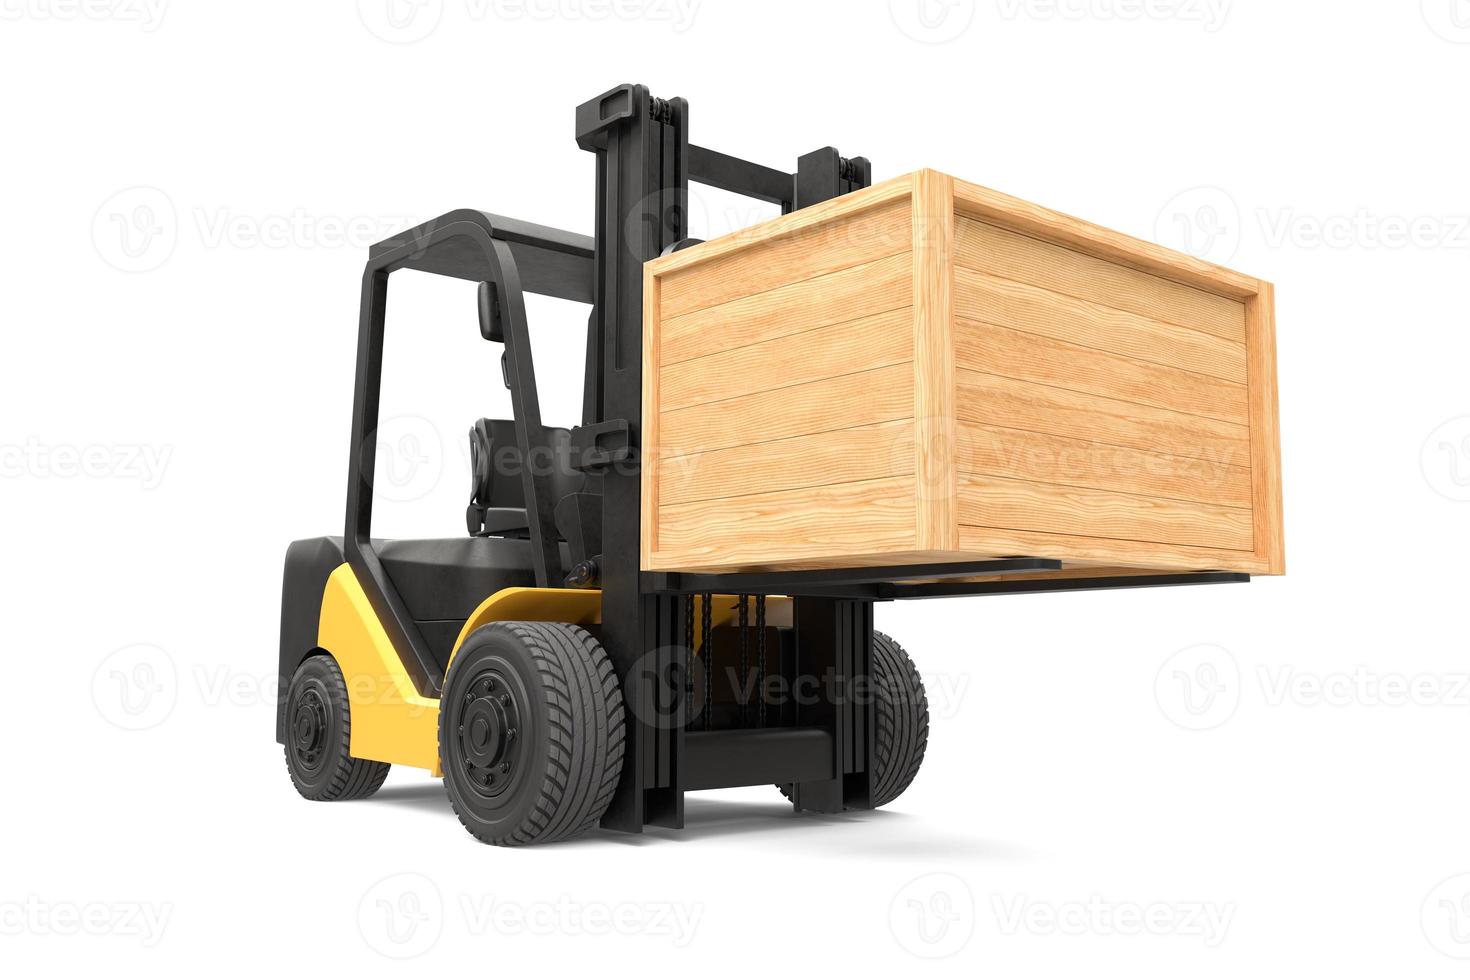 The forklift truck is lifting a wooden crate on white background, delivery service concept photo